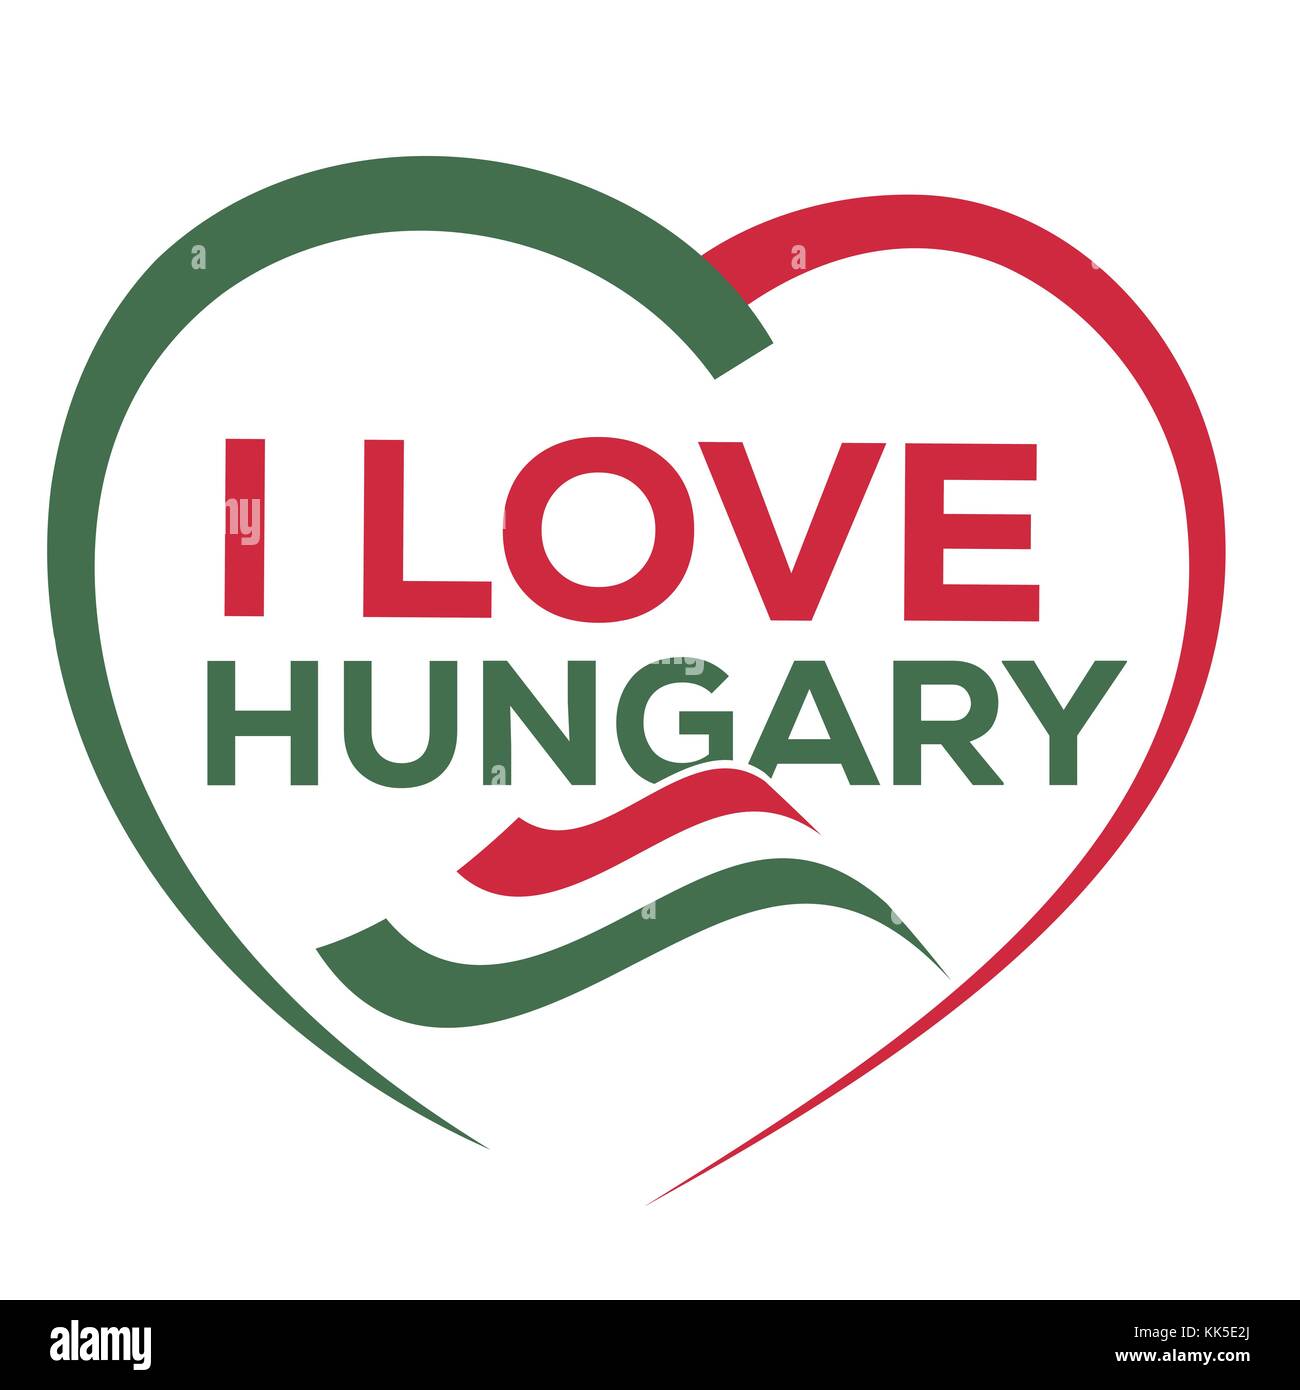 I love hungary with outline of heart and flag of hungary, icon design, isolated on white background. Stock Vector